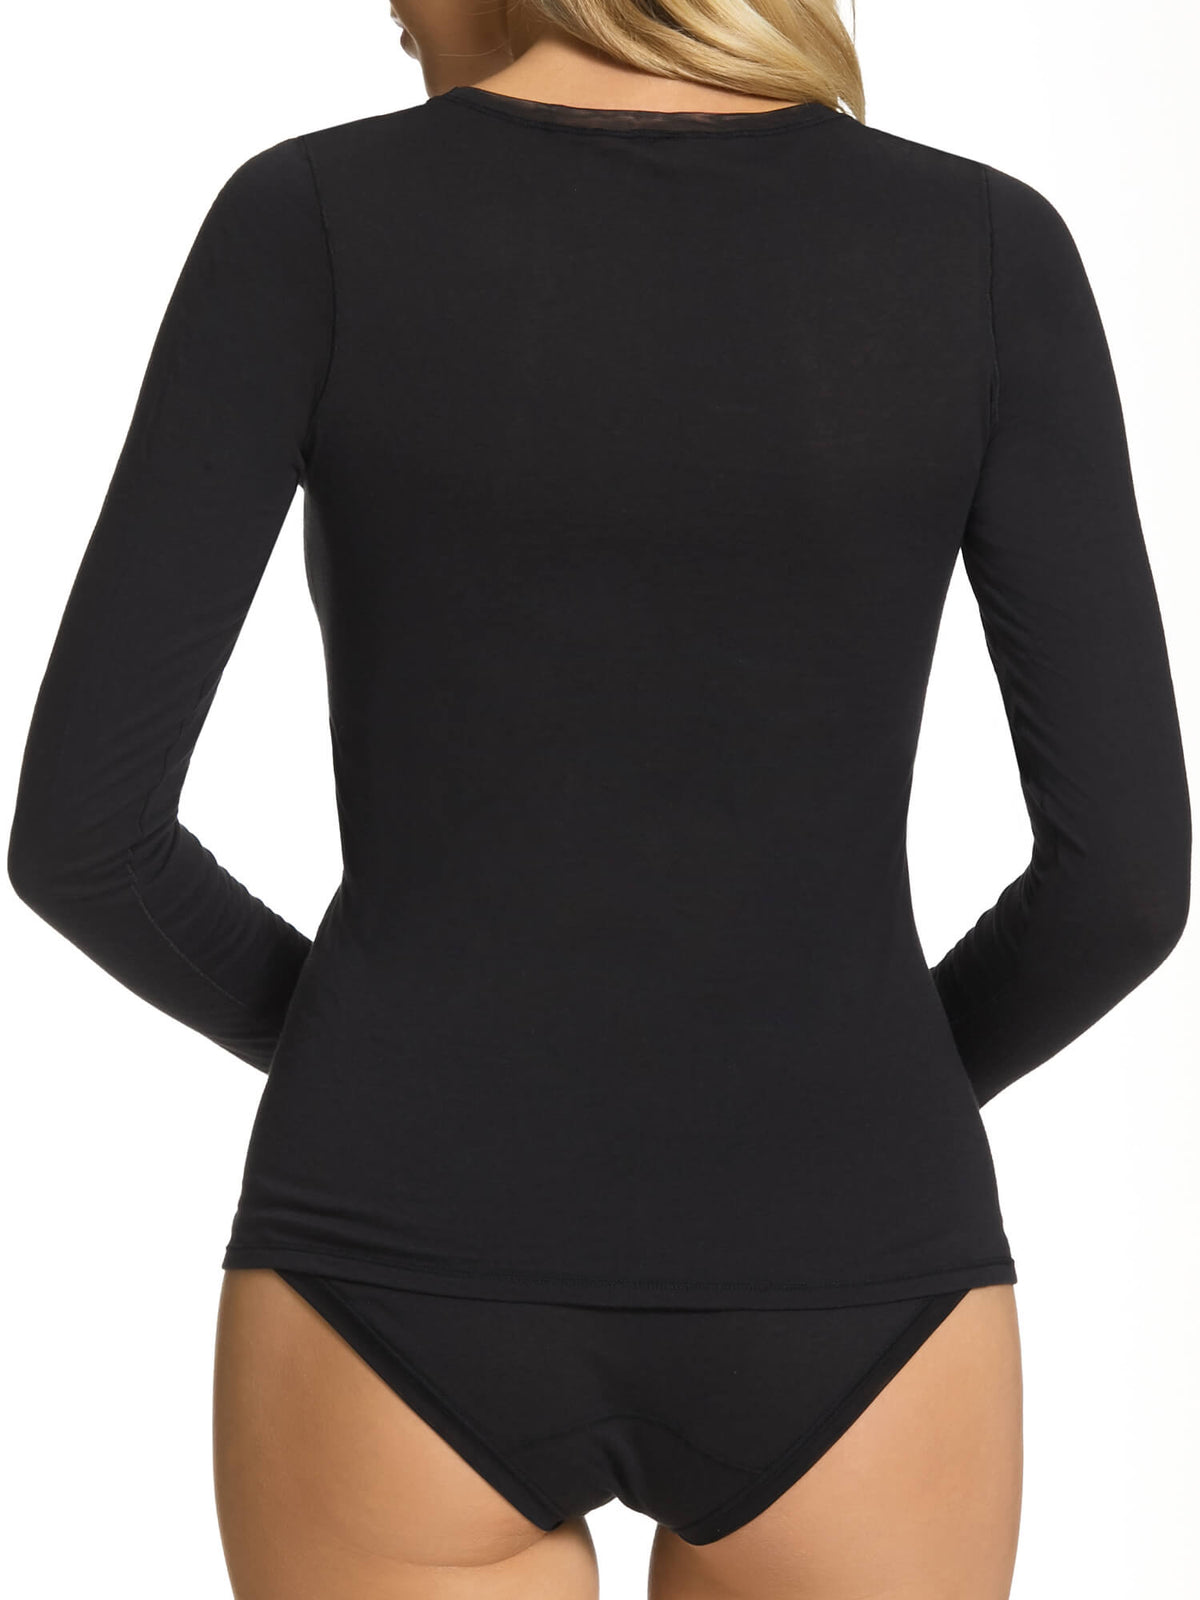 Pure Cotton Long Sleeve Black Layering Top by Kayser Lingerie